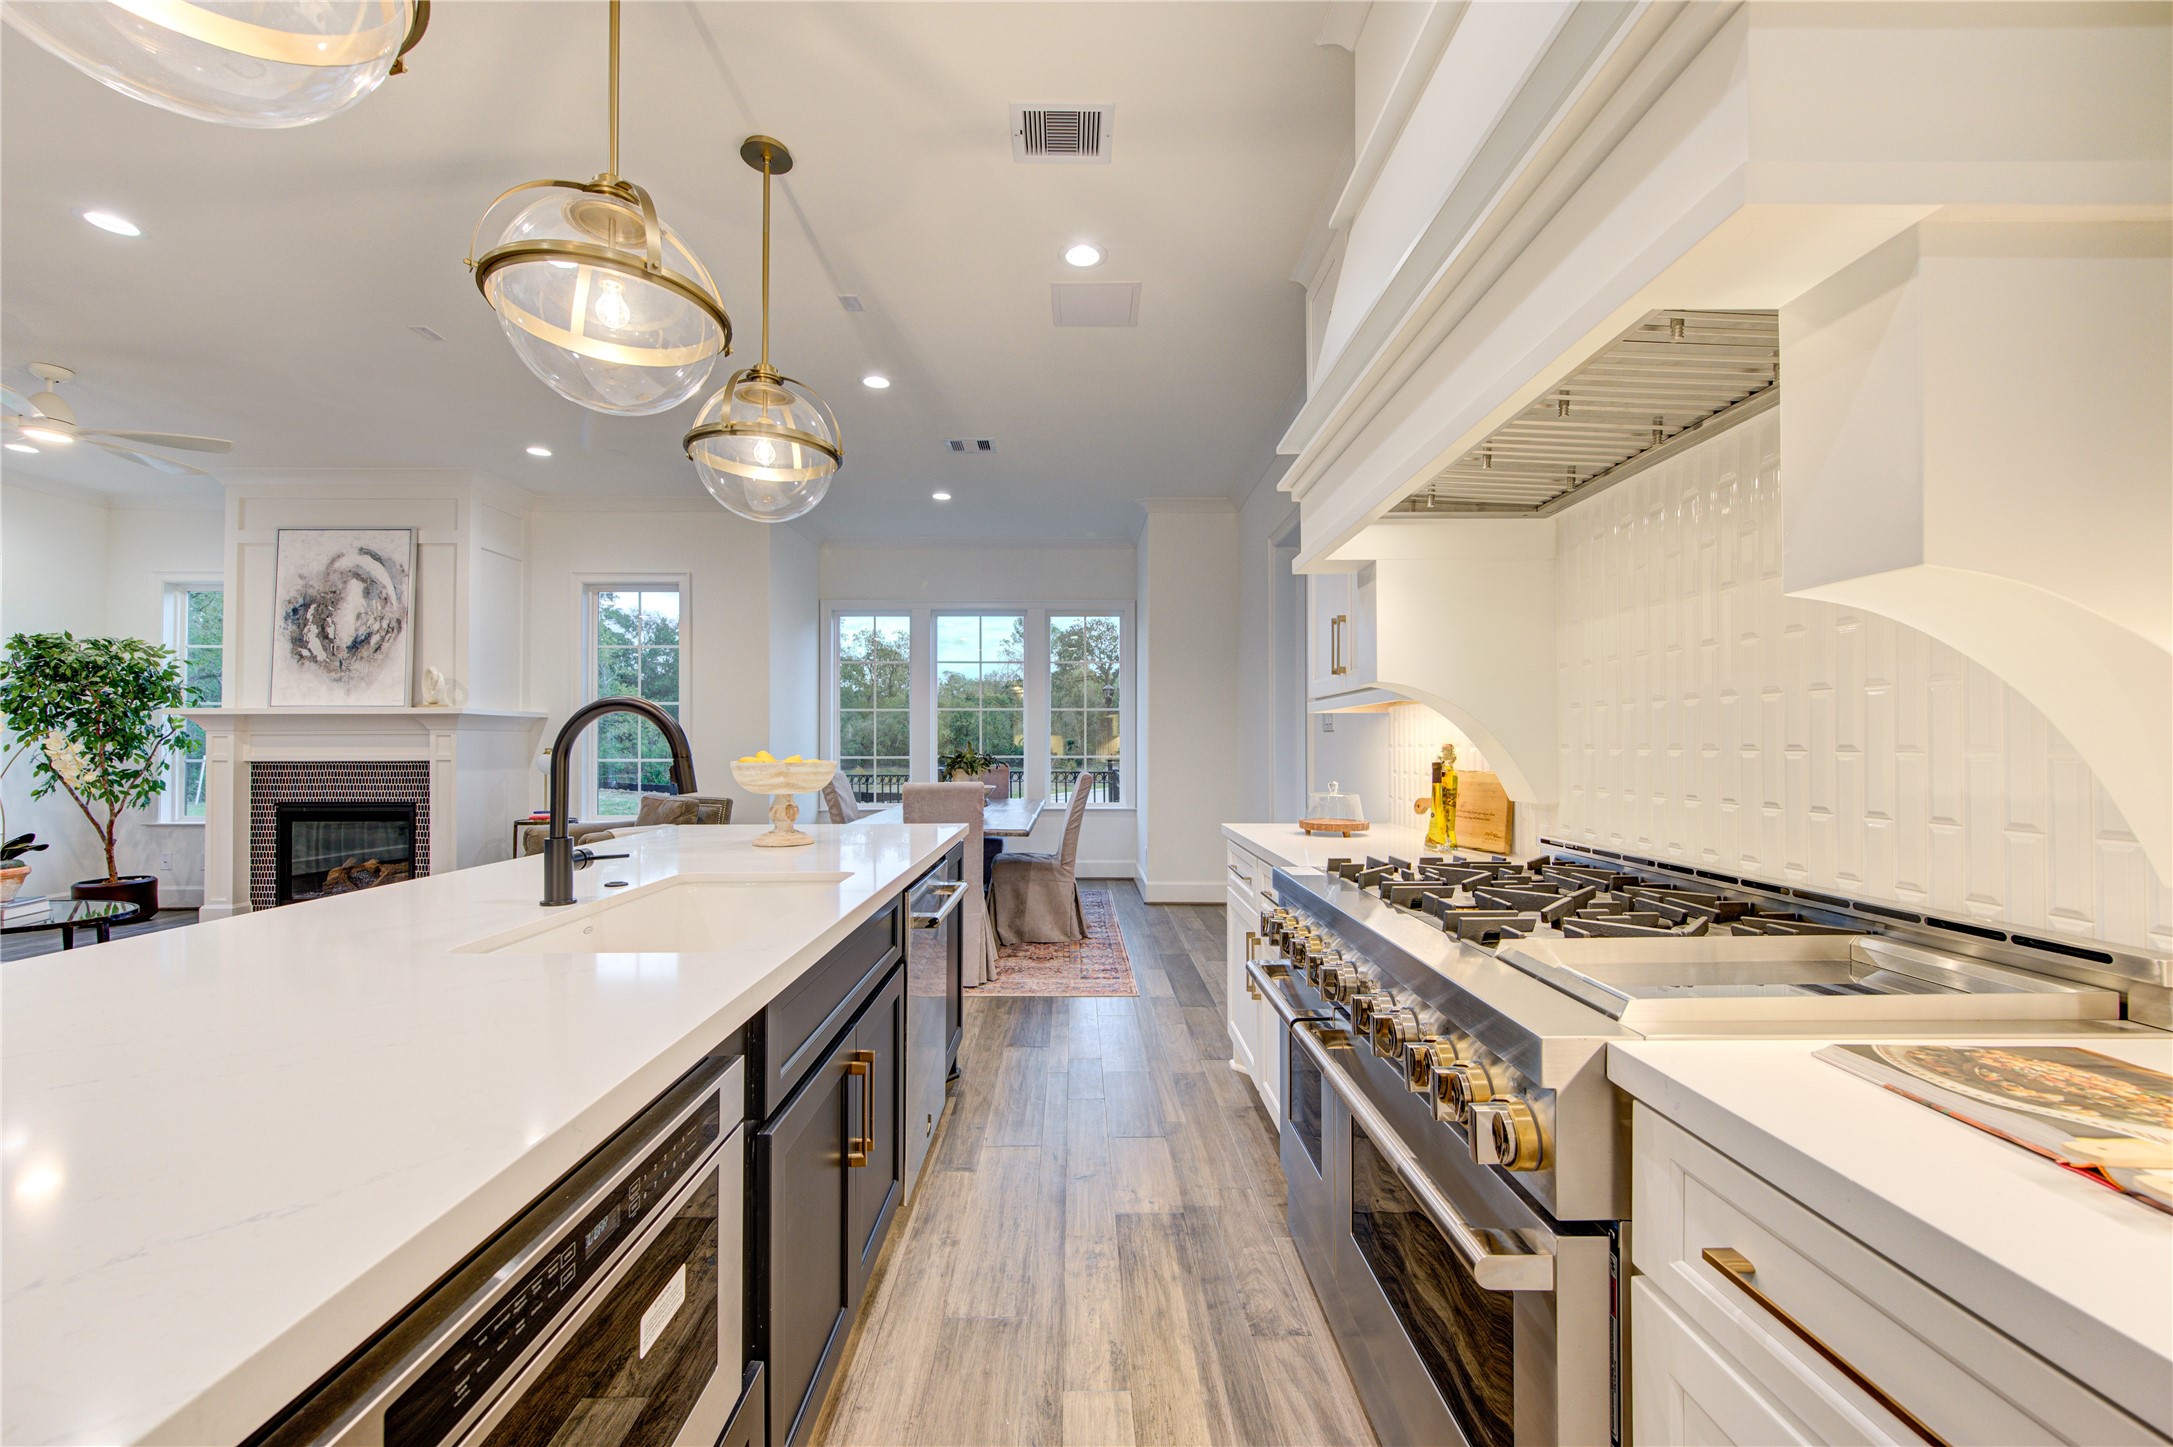 The kitchen is a culinary delight with professional series appliances, including a six burner as range and tons of Quartz counters for preparing meals and entertaining.